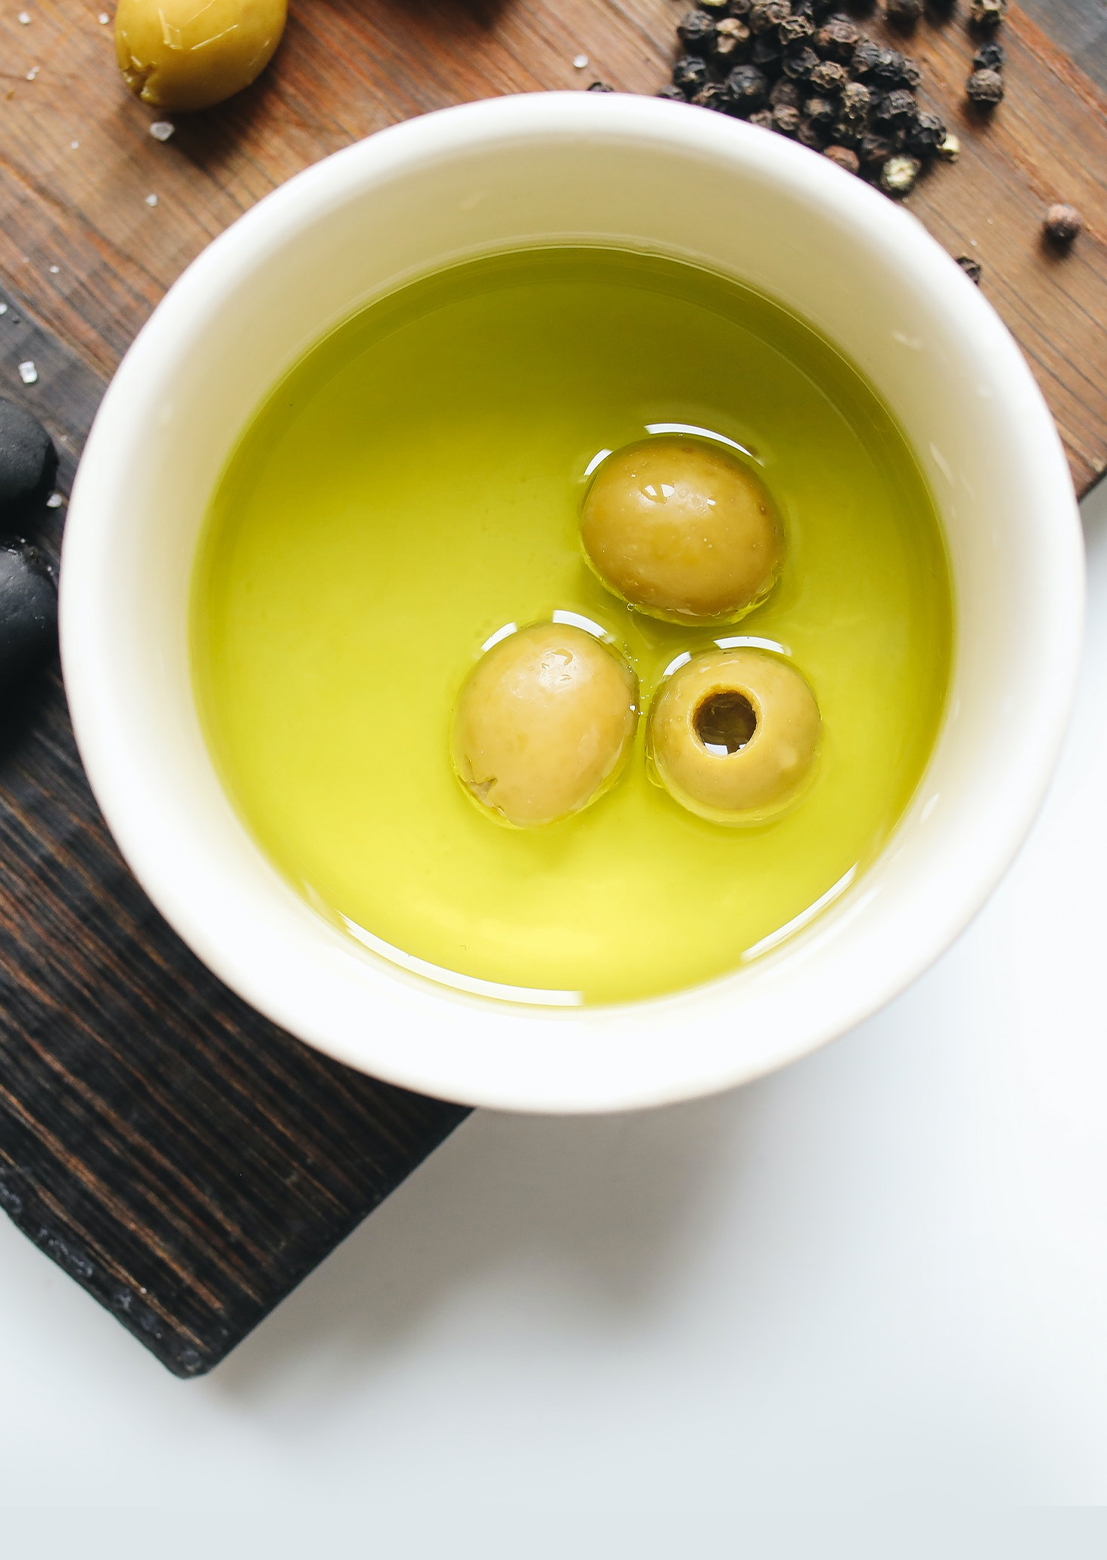 Olive Oil for the Skin: Benefits and Risks